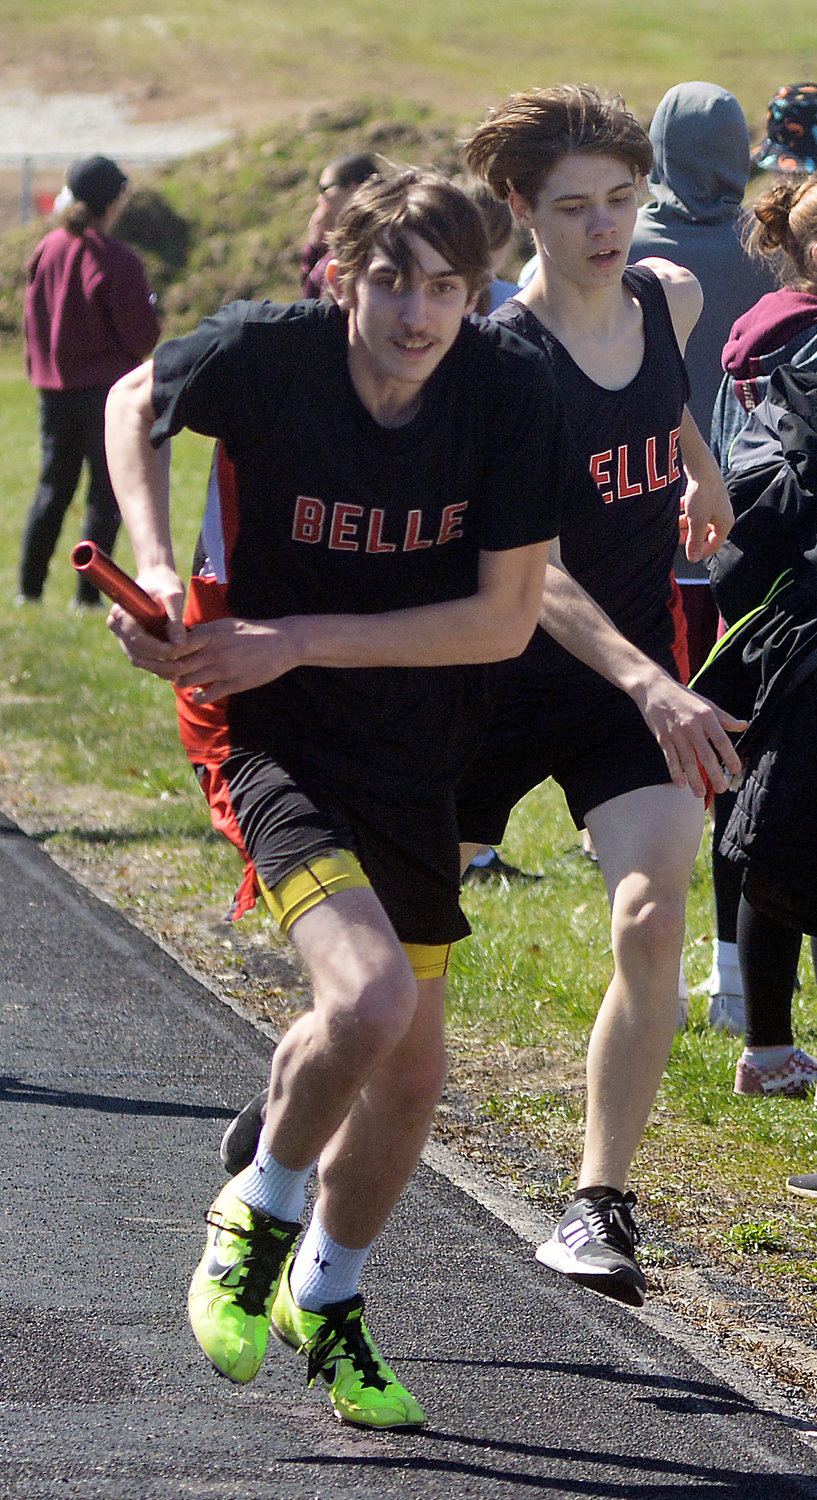 Keith Rose (far left) secures the baton from Belle Tiger teammate Cameron Niehaus during the boys 4x800-meter relay. Belle competed last night (Tuesday) in a meet at Fatima High School while Vienna is scheduled to return to action tomorrow (Thursday) at Eugene.